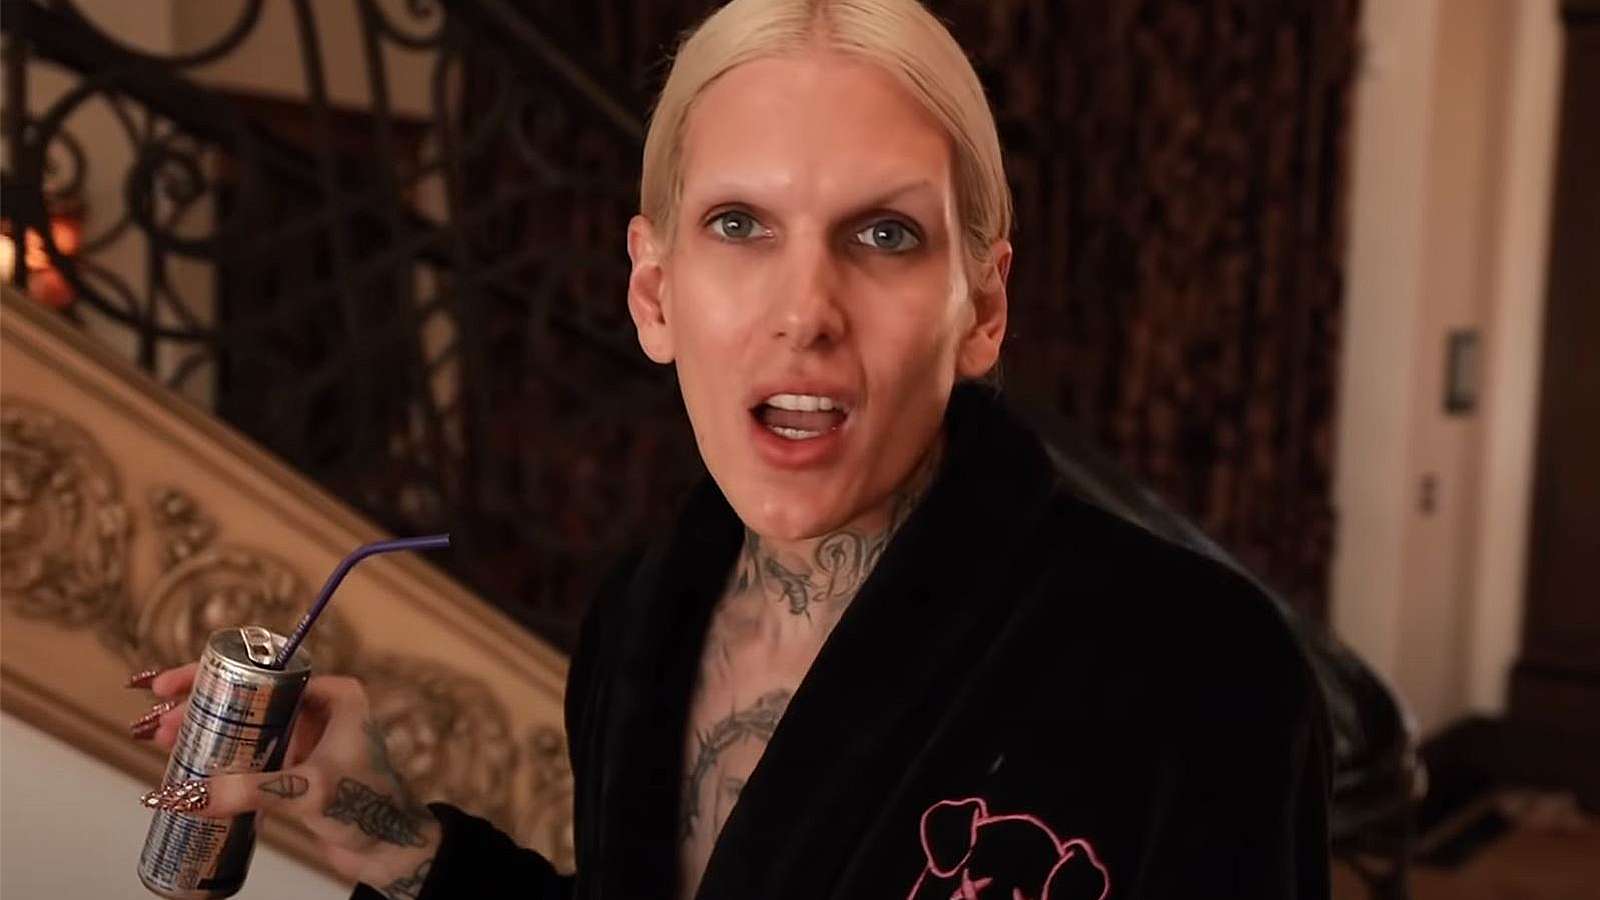 Jeffree Star speaks to the camera during a vlog, wearing no makeup.